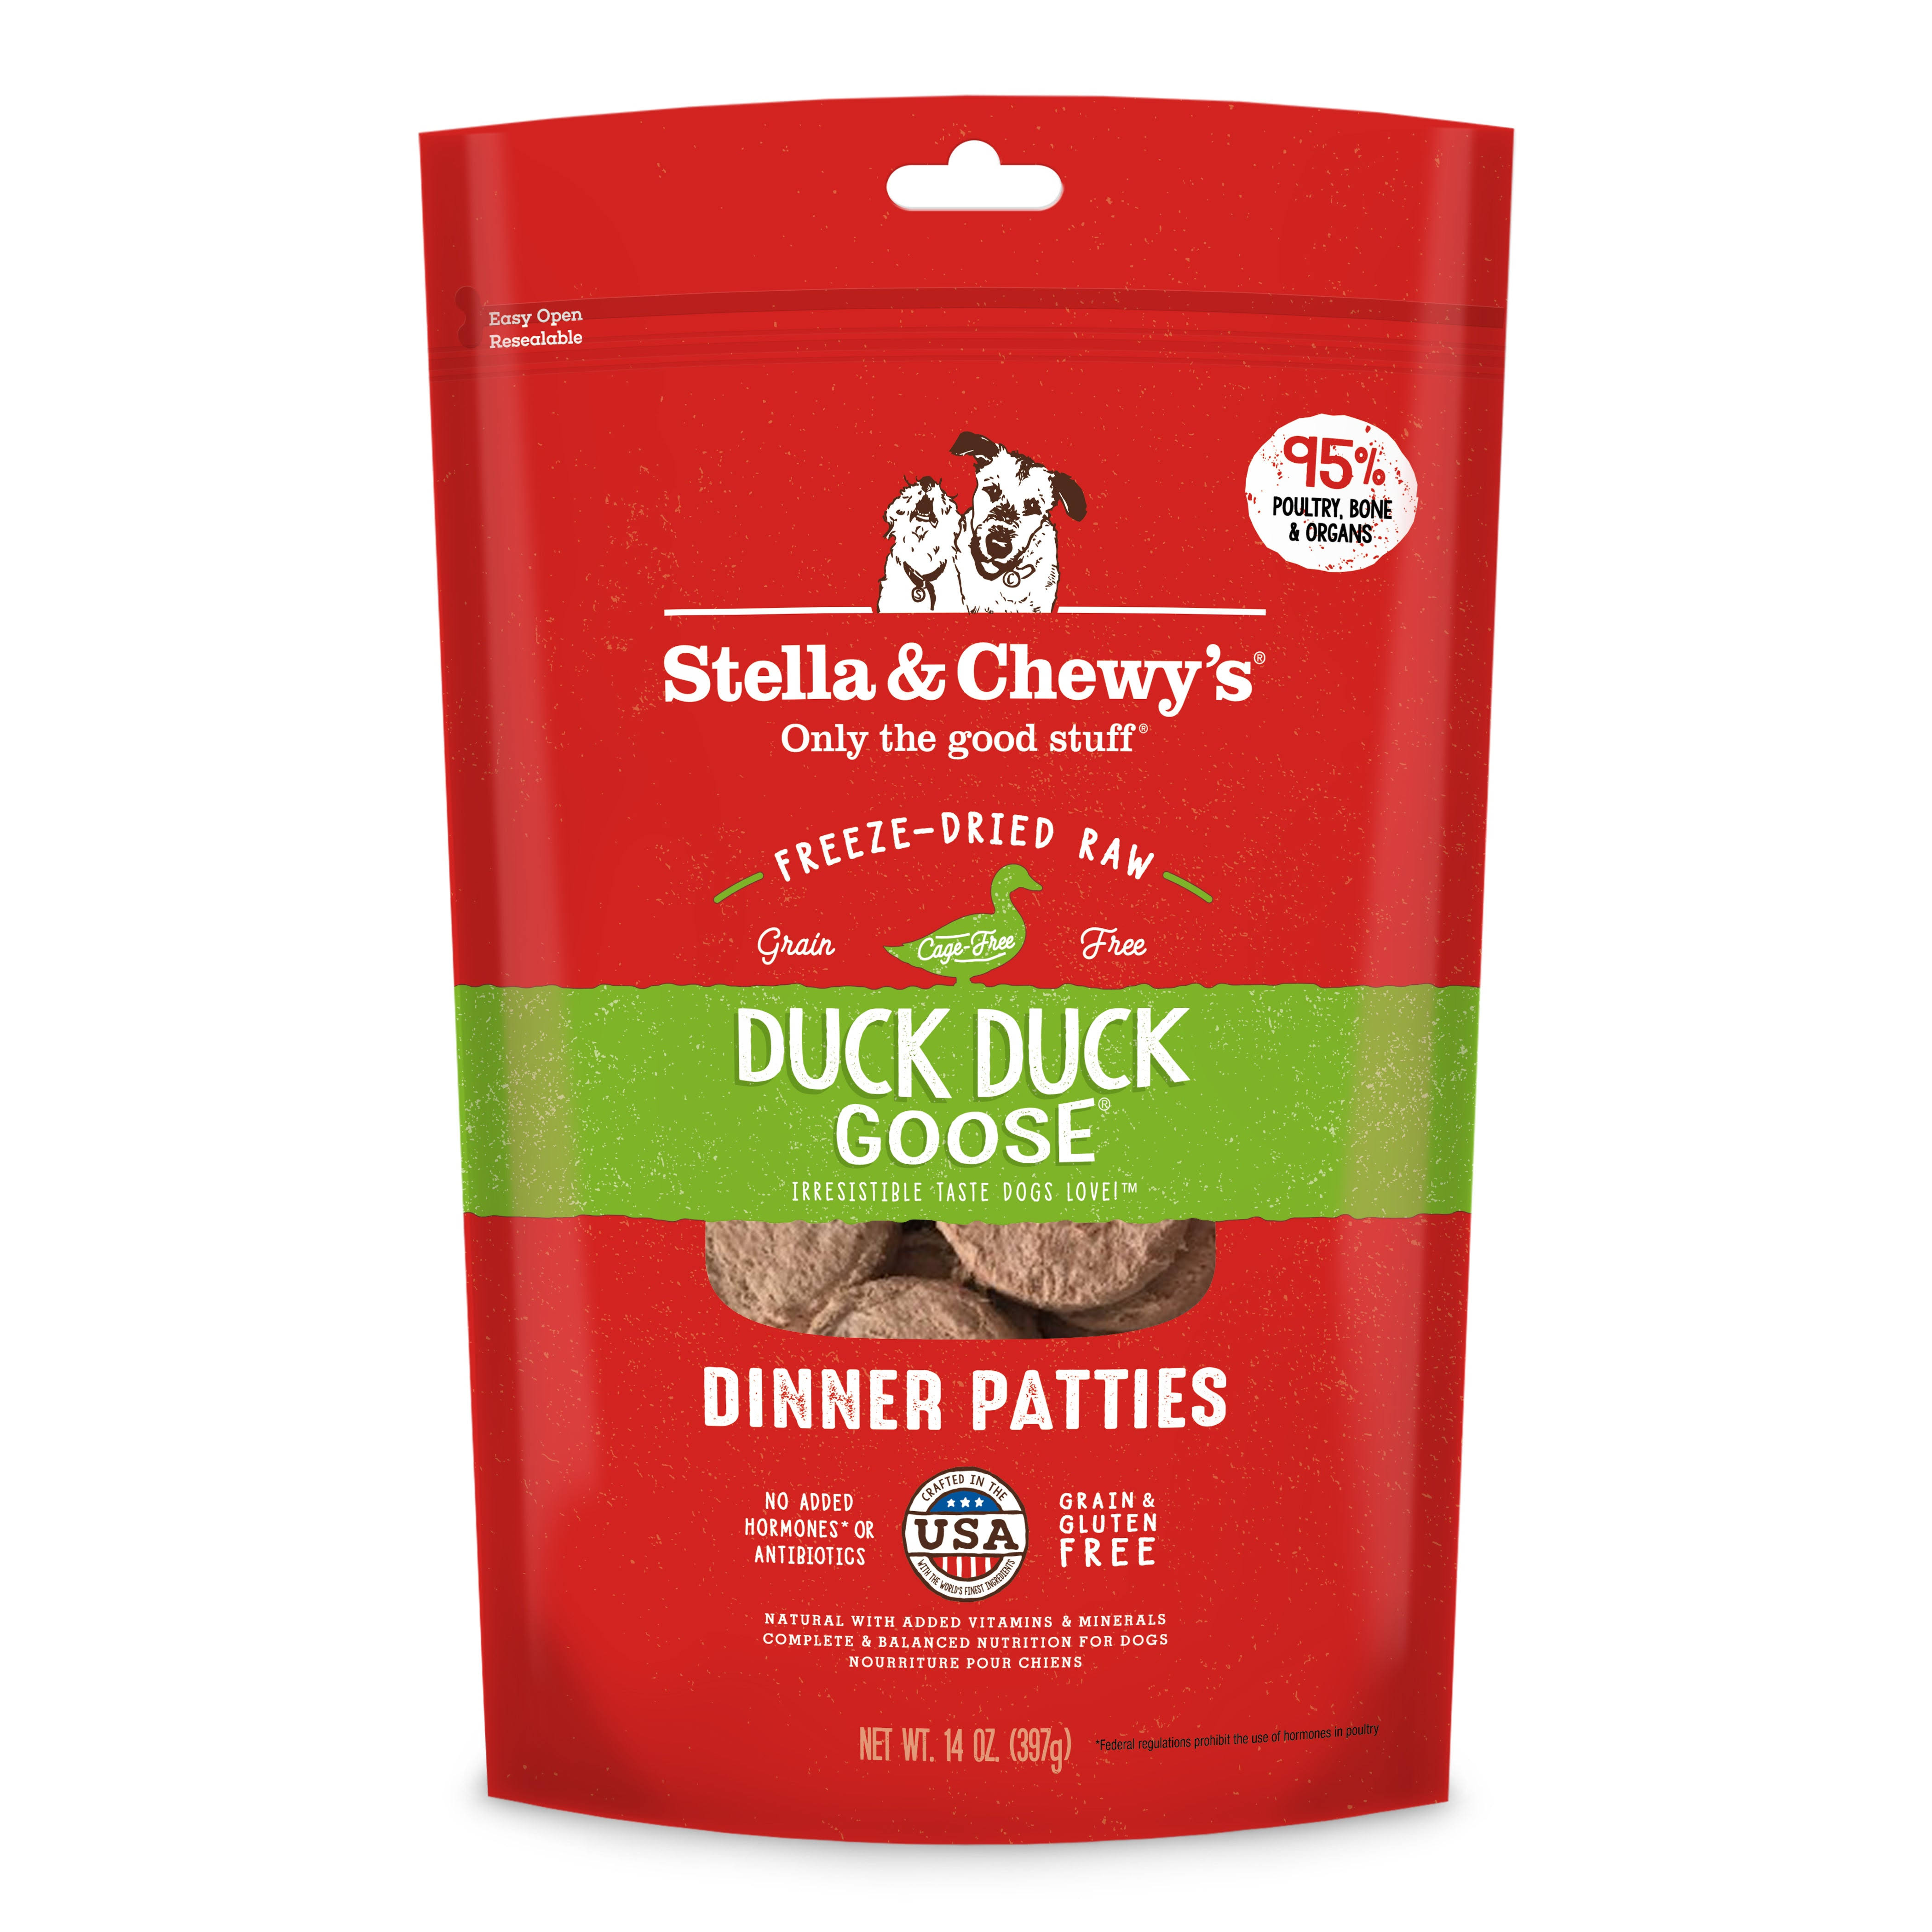 Stella and Chewy's Freeze Dried Dog Food - Duck Duck Goose Dinner Patties